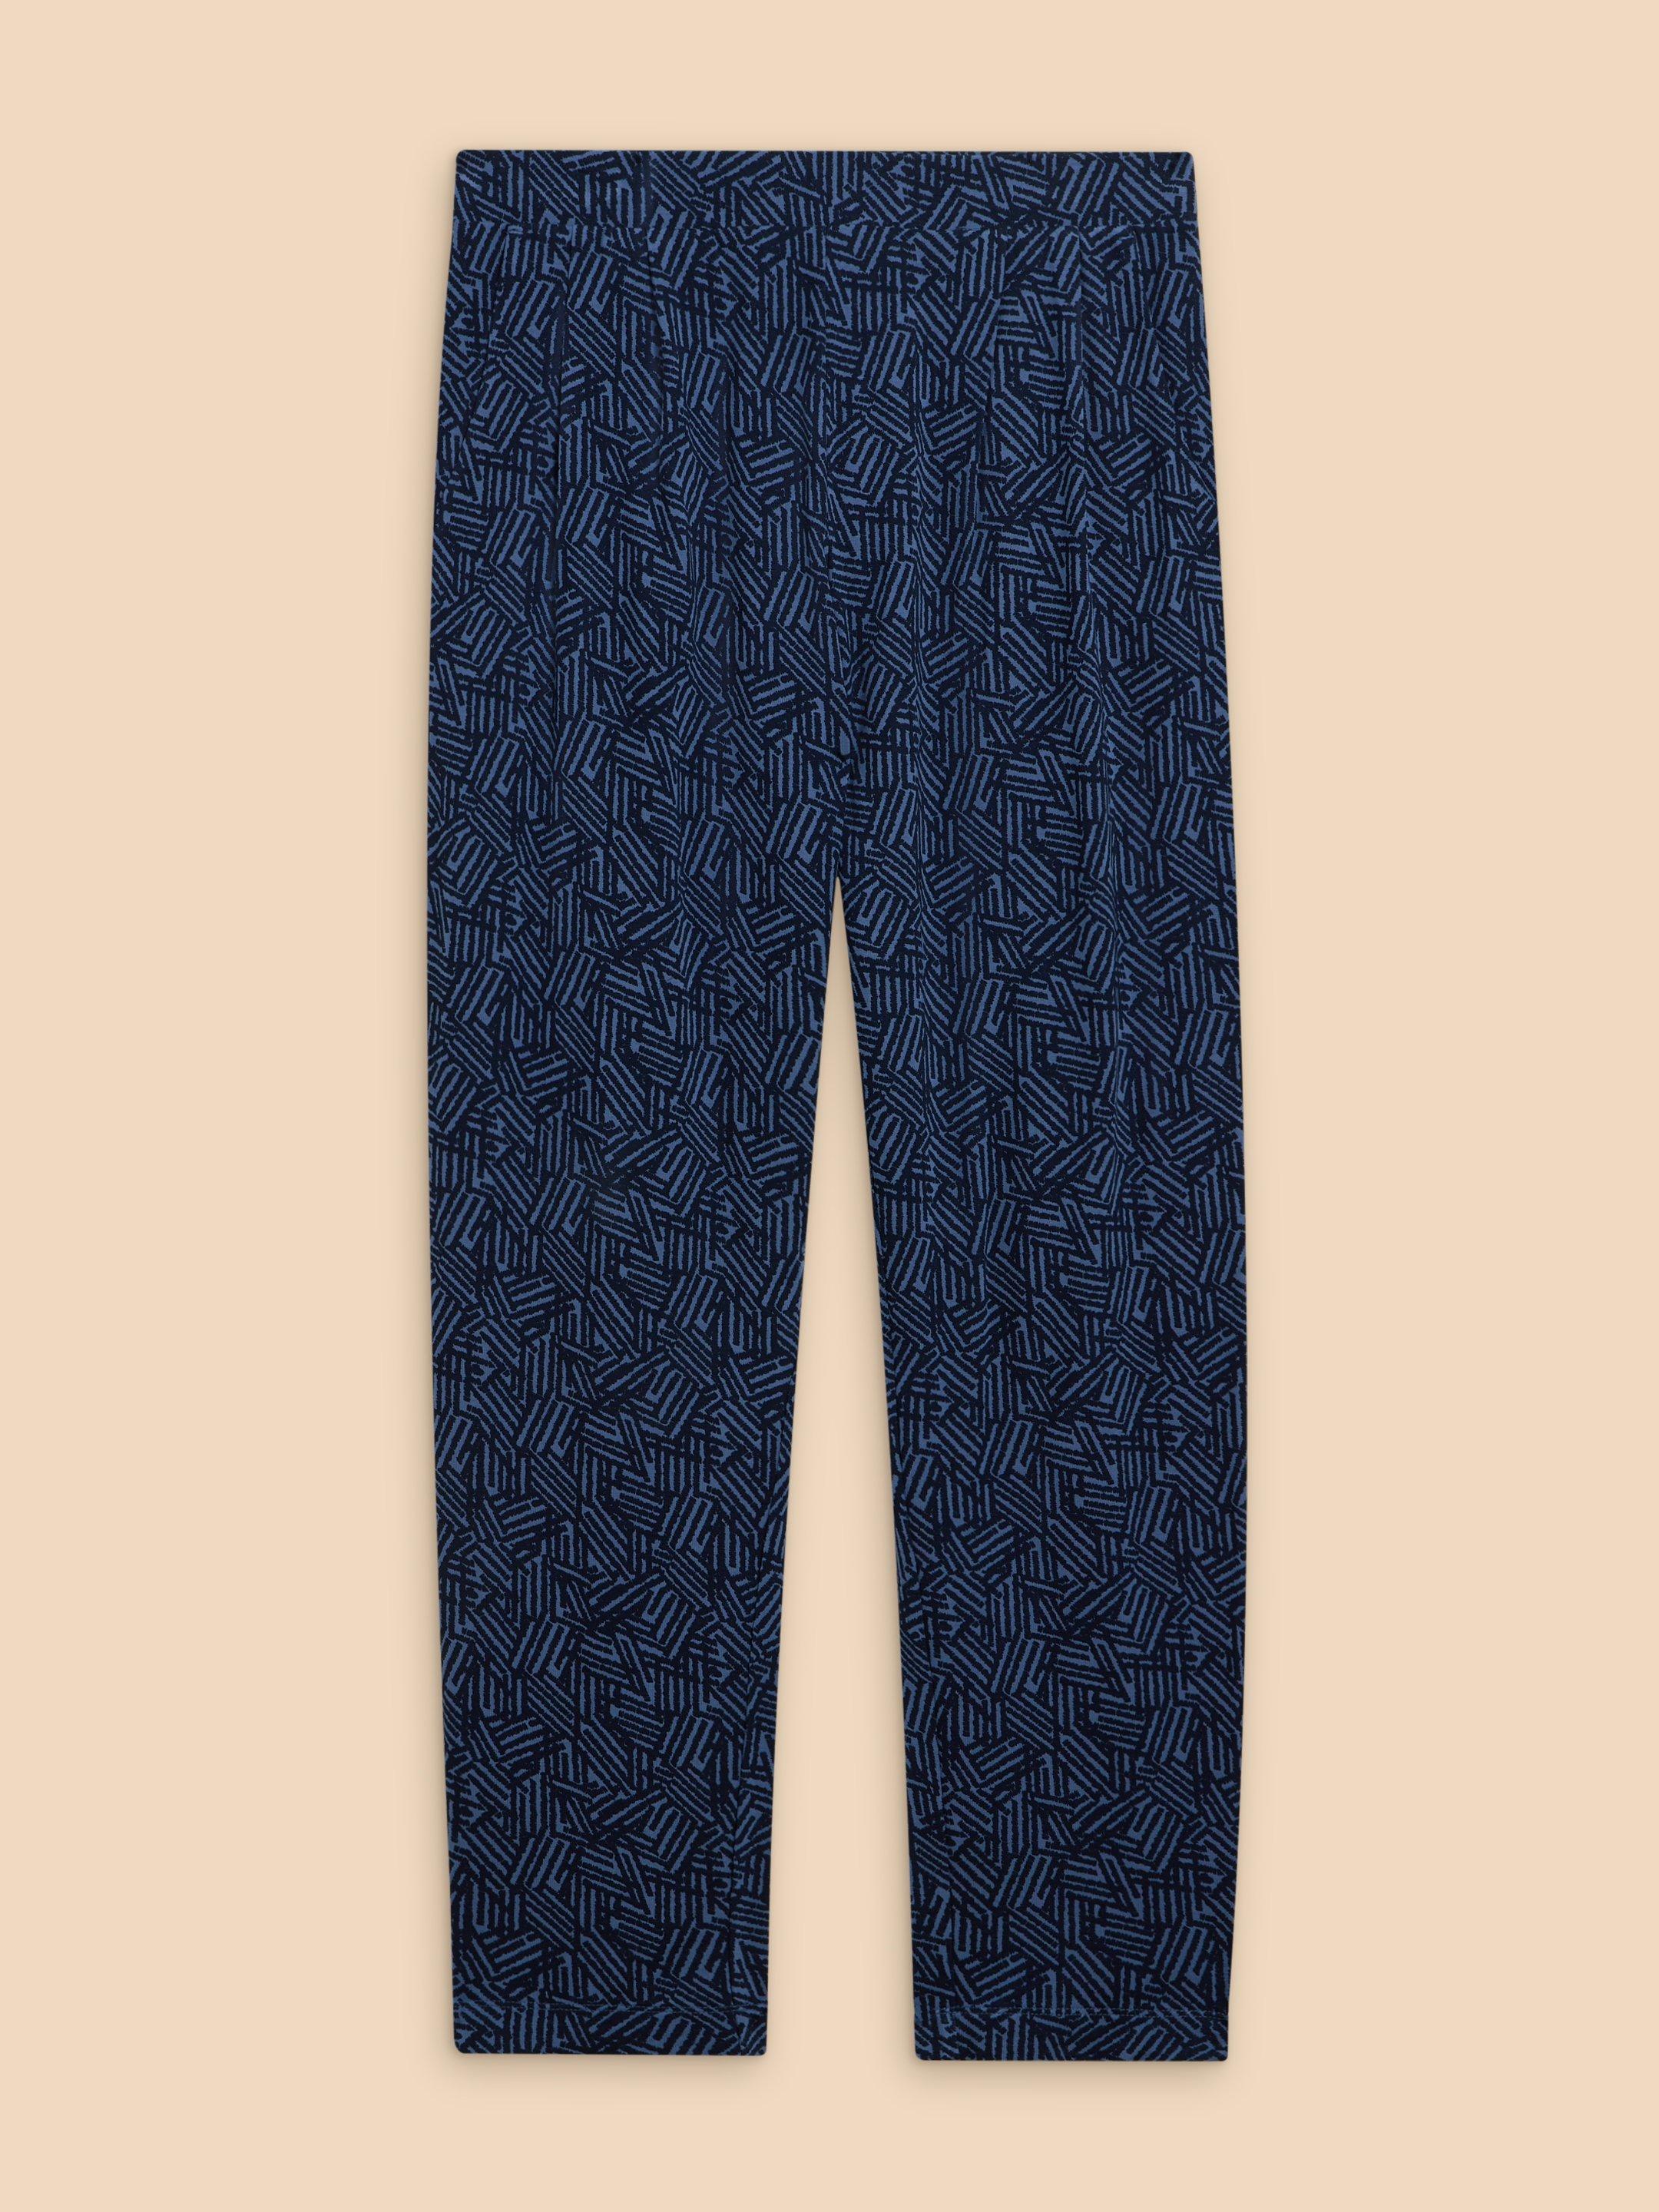 Maison Eco Vero Printed Jersey Trouser in NAVY PR - FLAT FRONT